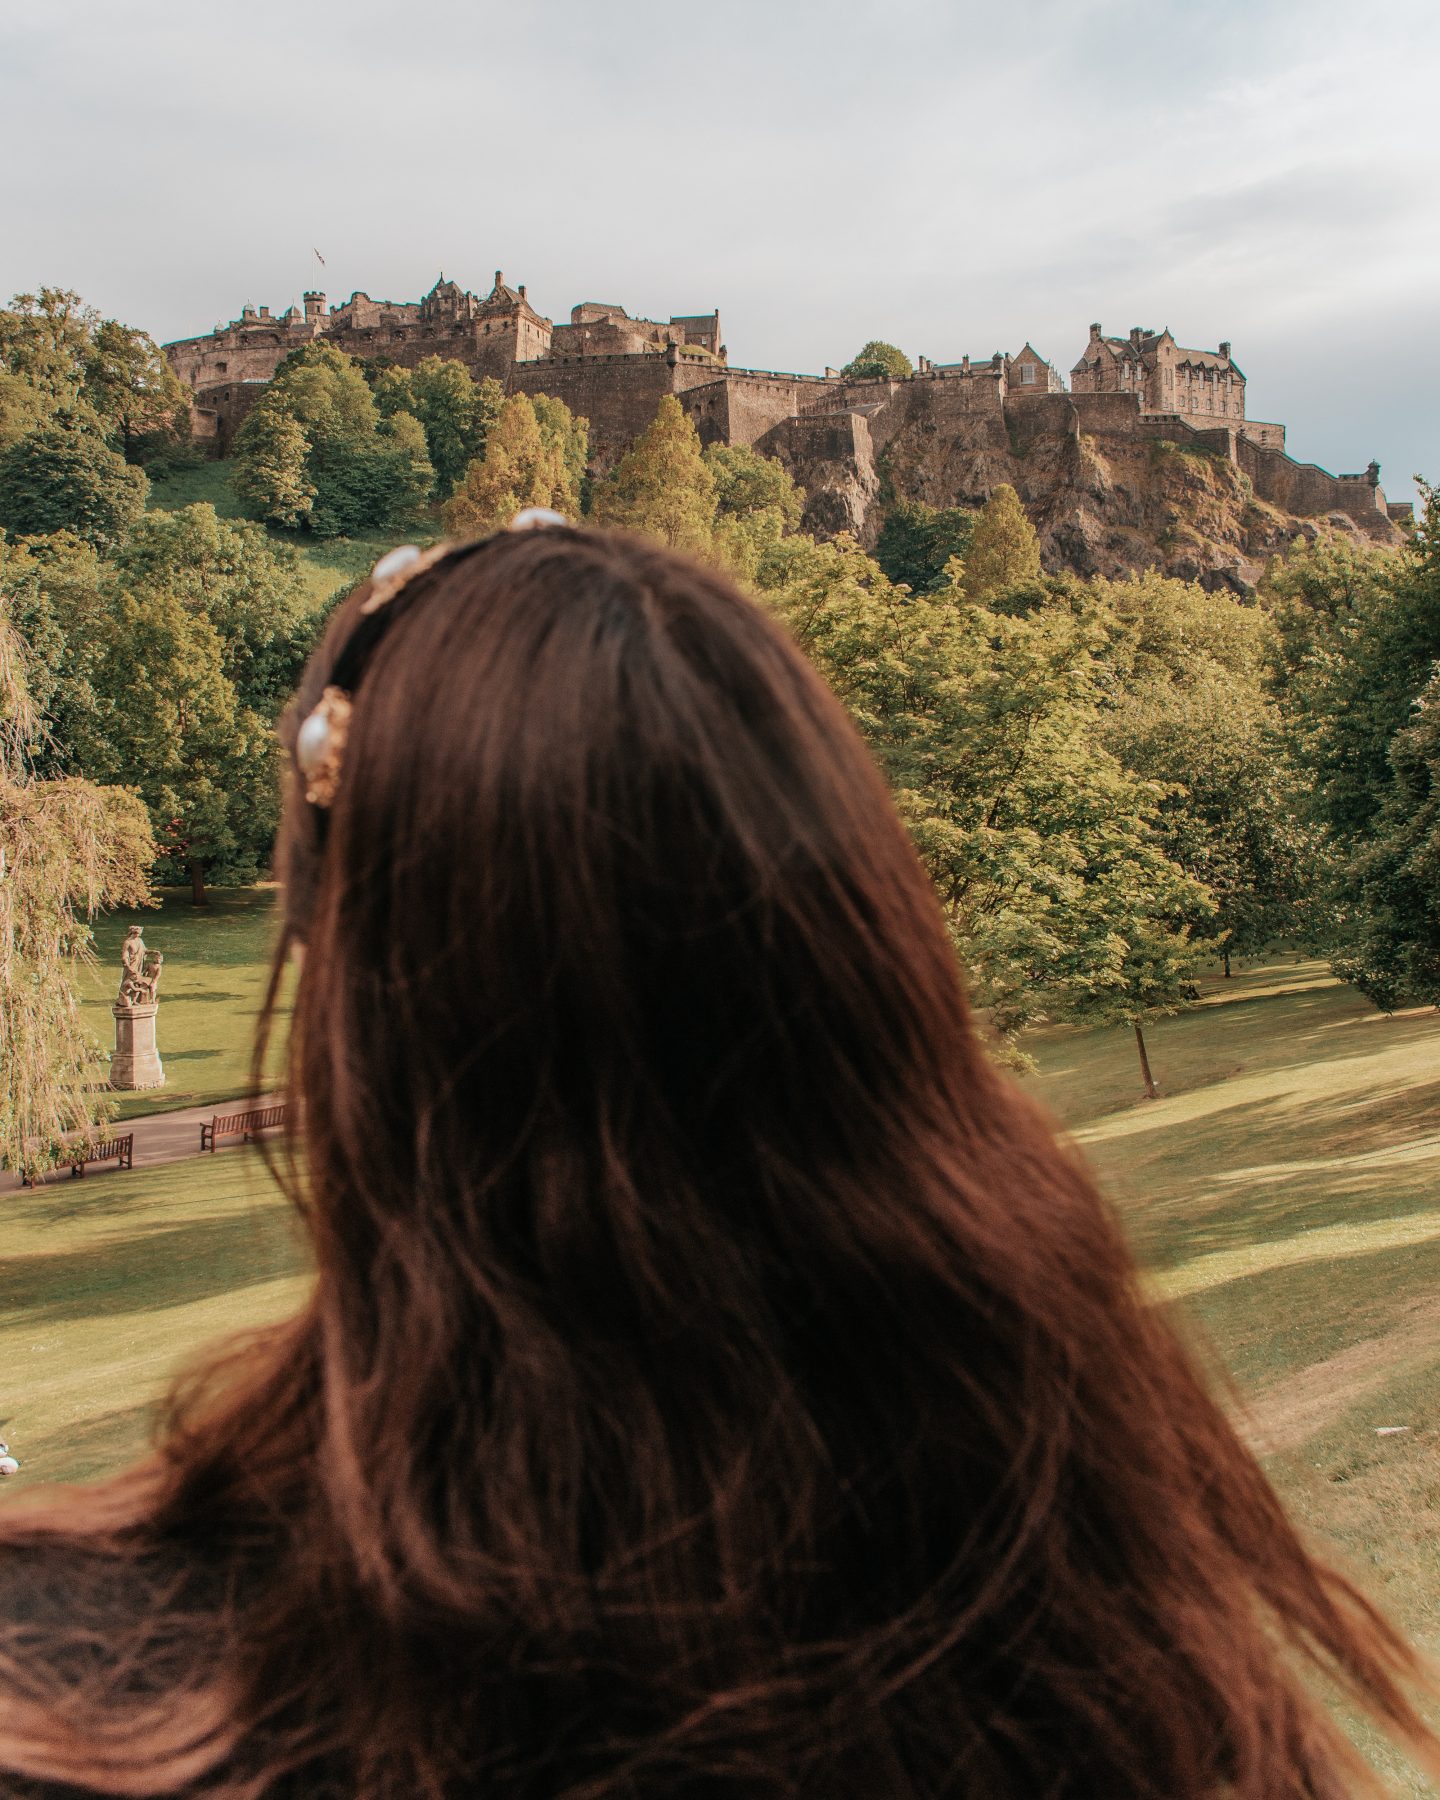 Back of girl's head in front of castle on a hill - Edinburgh Castle from Princes Street Gardens